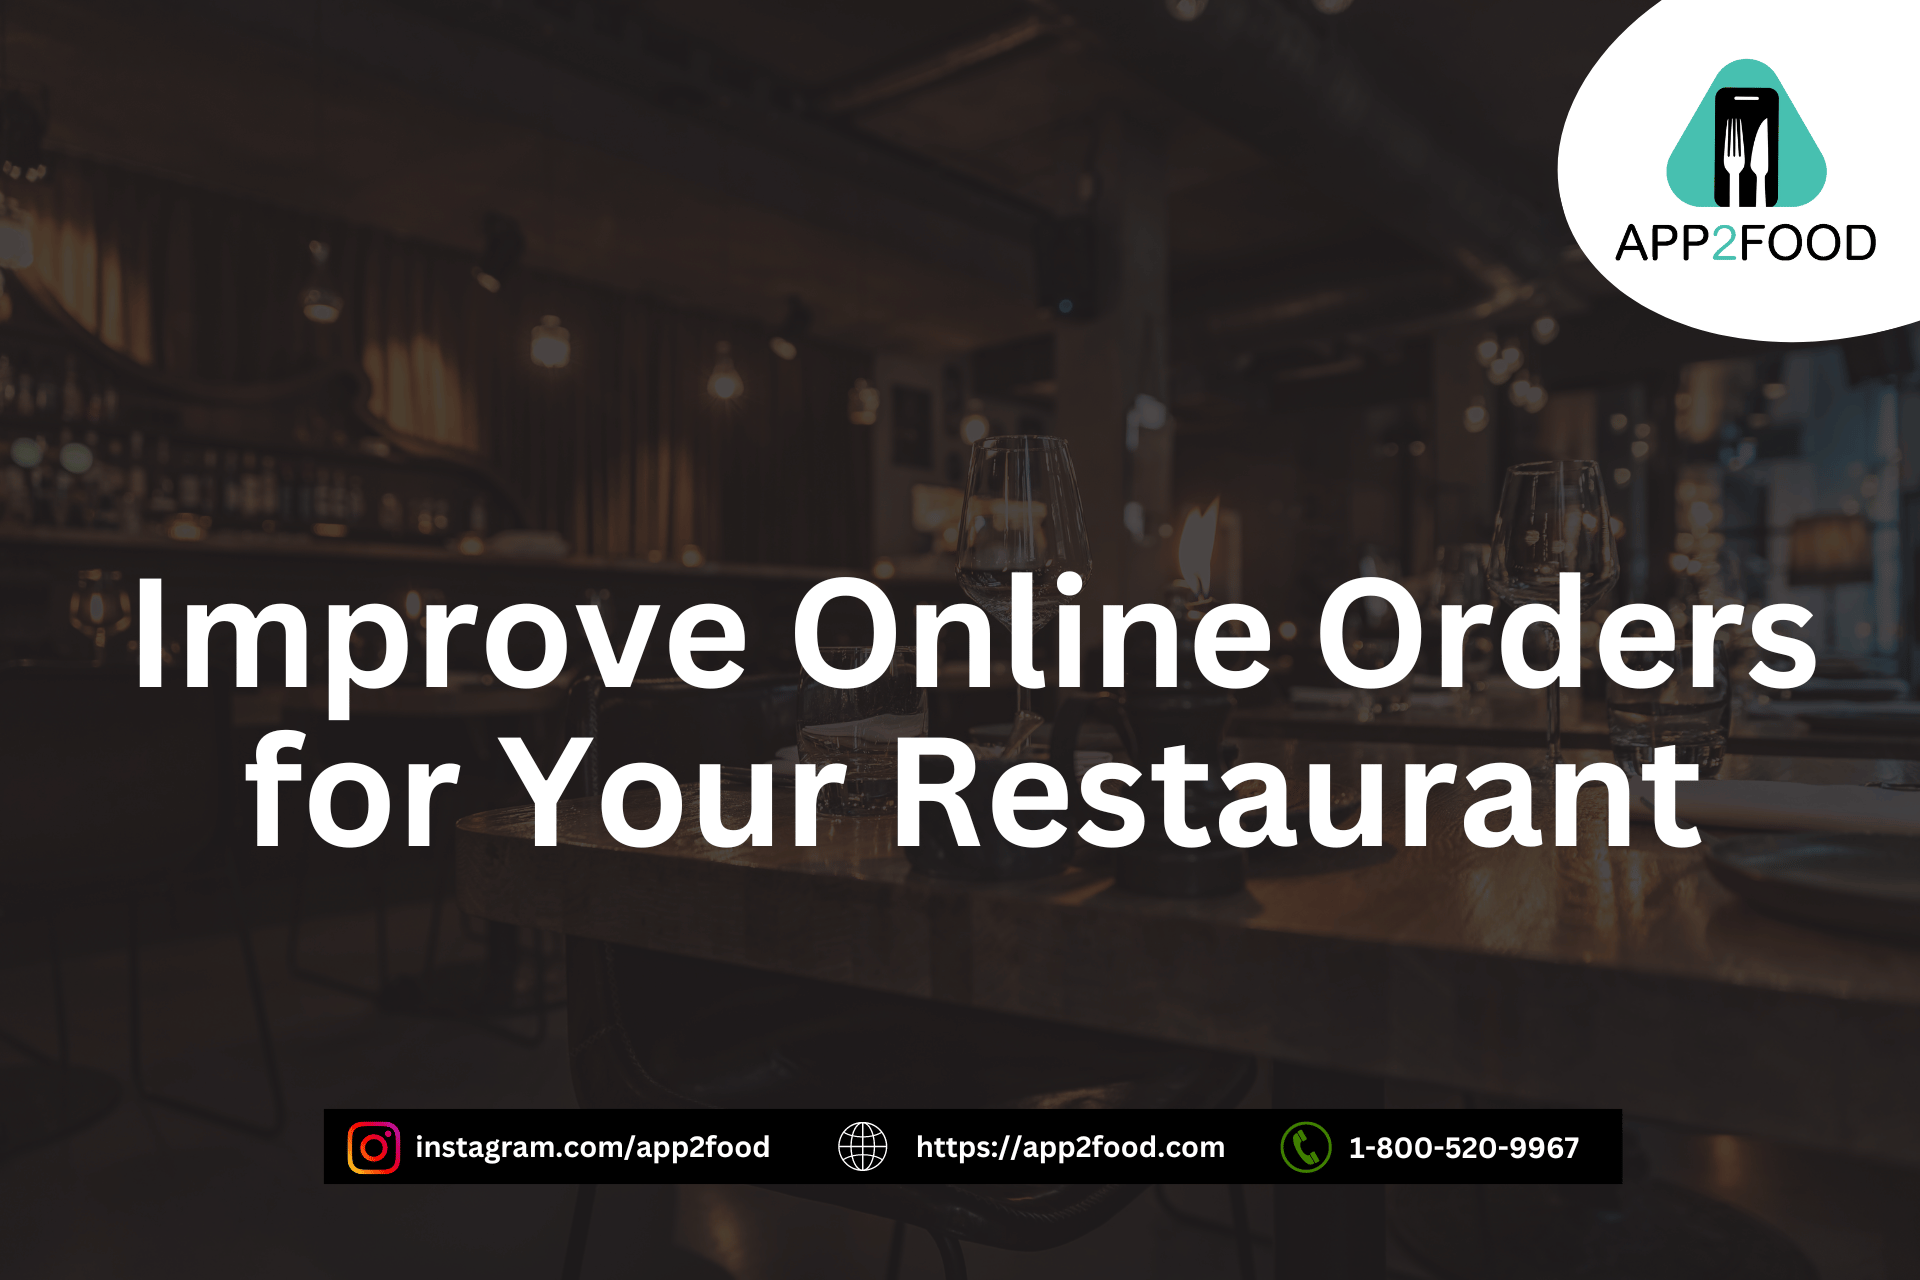 App2Food Can Help You Improve Online Orders for Your Restaurant